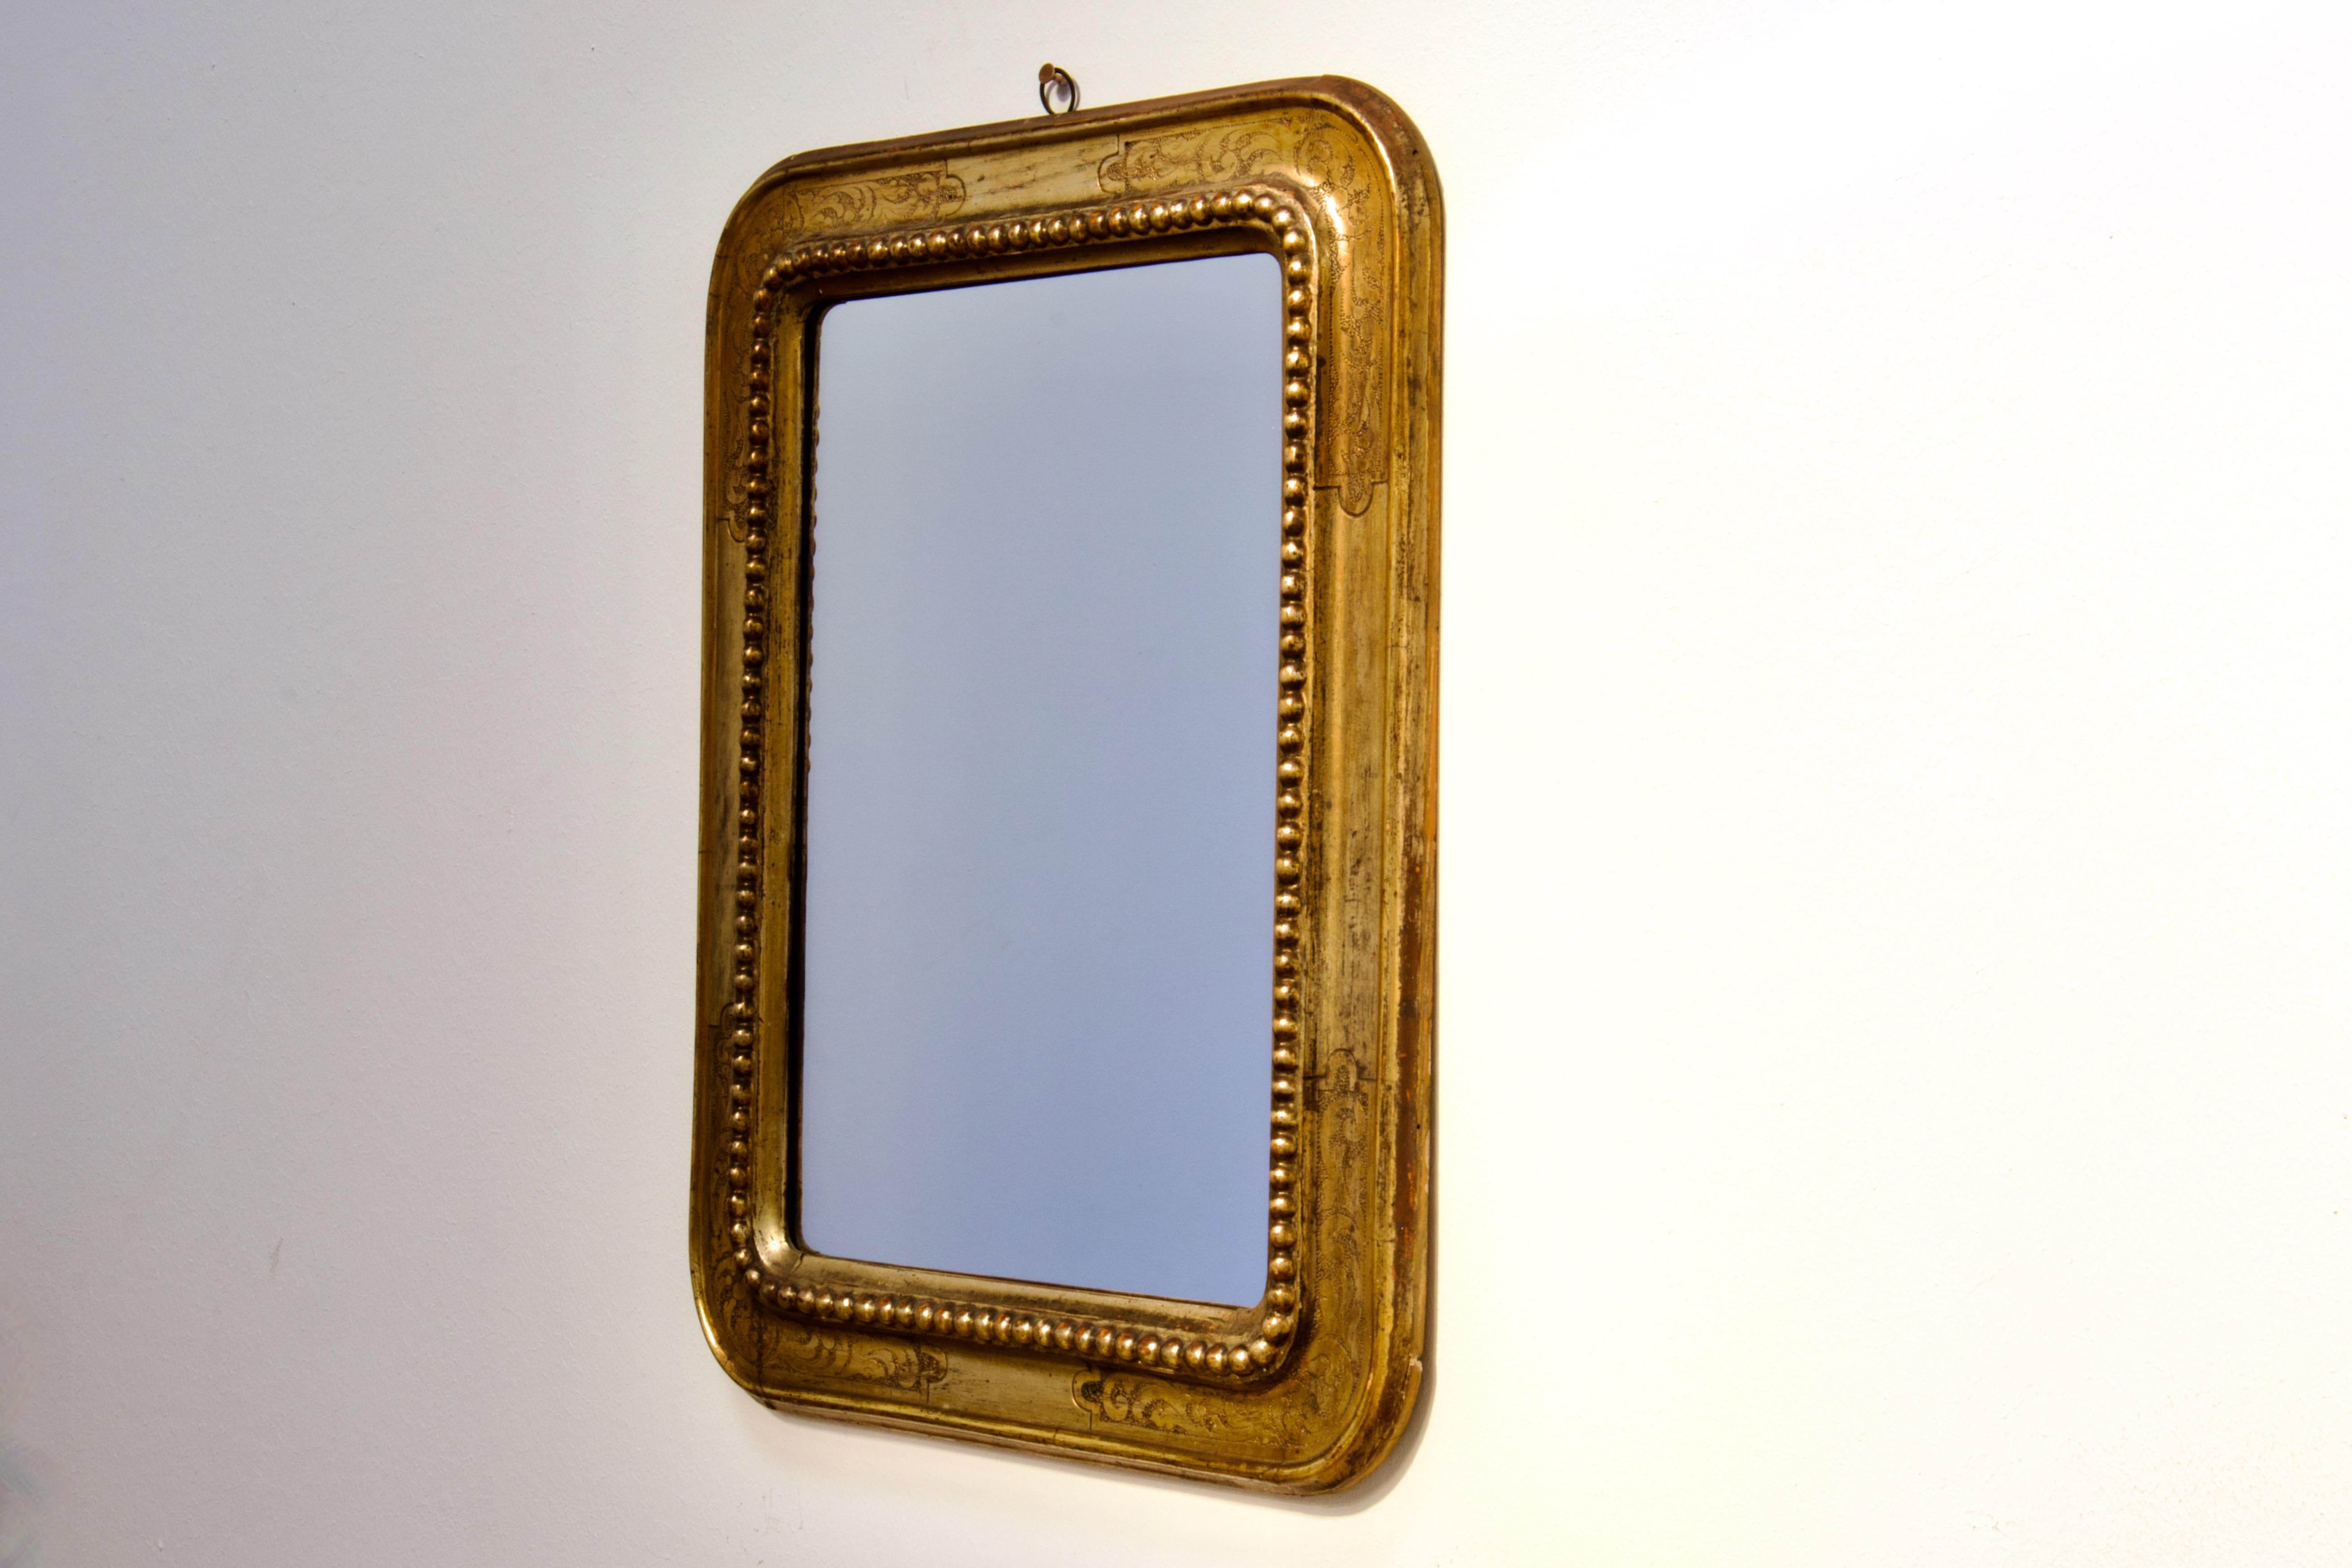 Superb Belle Époque Wall Mirror from mid to late 1800s Italy. Exquisite proportions, finest materials, master craftsmanship and organic forms exemplified this period of economic prosperity; when beauty was, in and of itself, a virtue.

The frame is